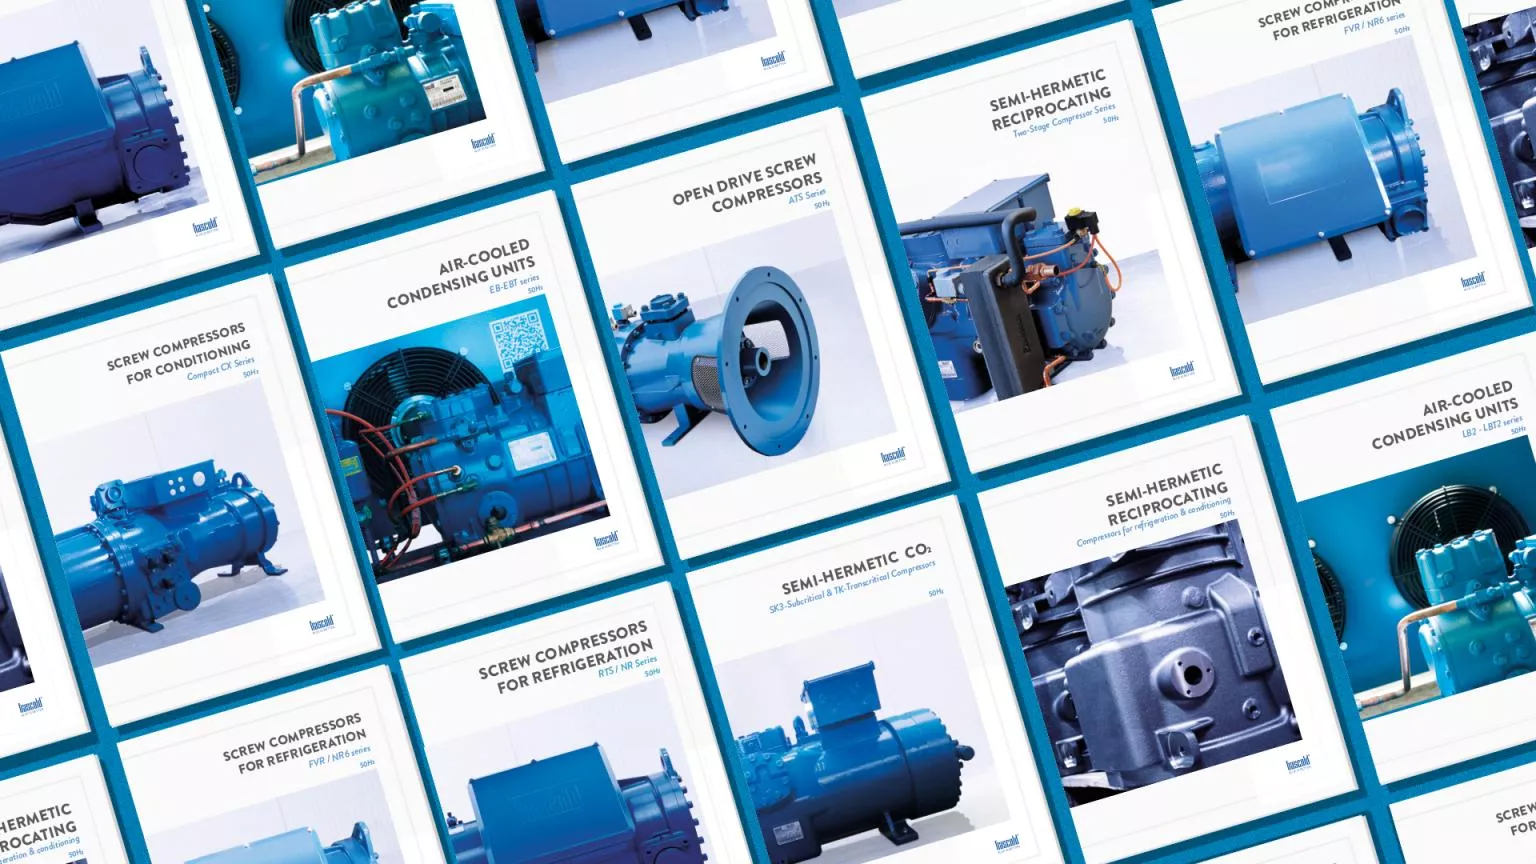 Frascold has launched new product catalogues